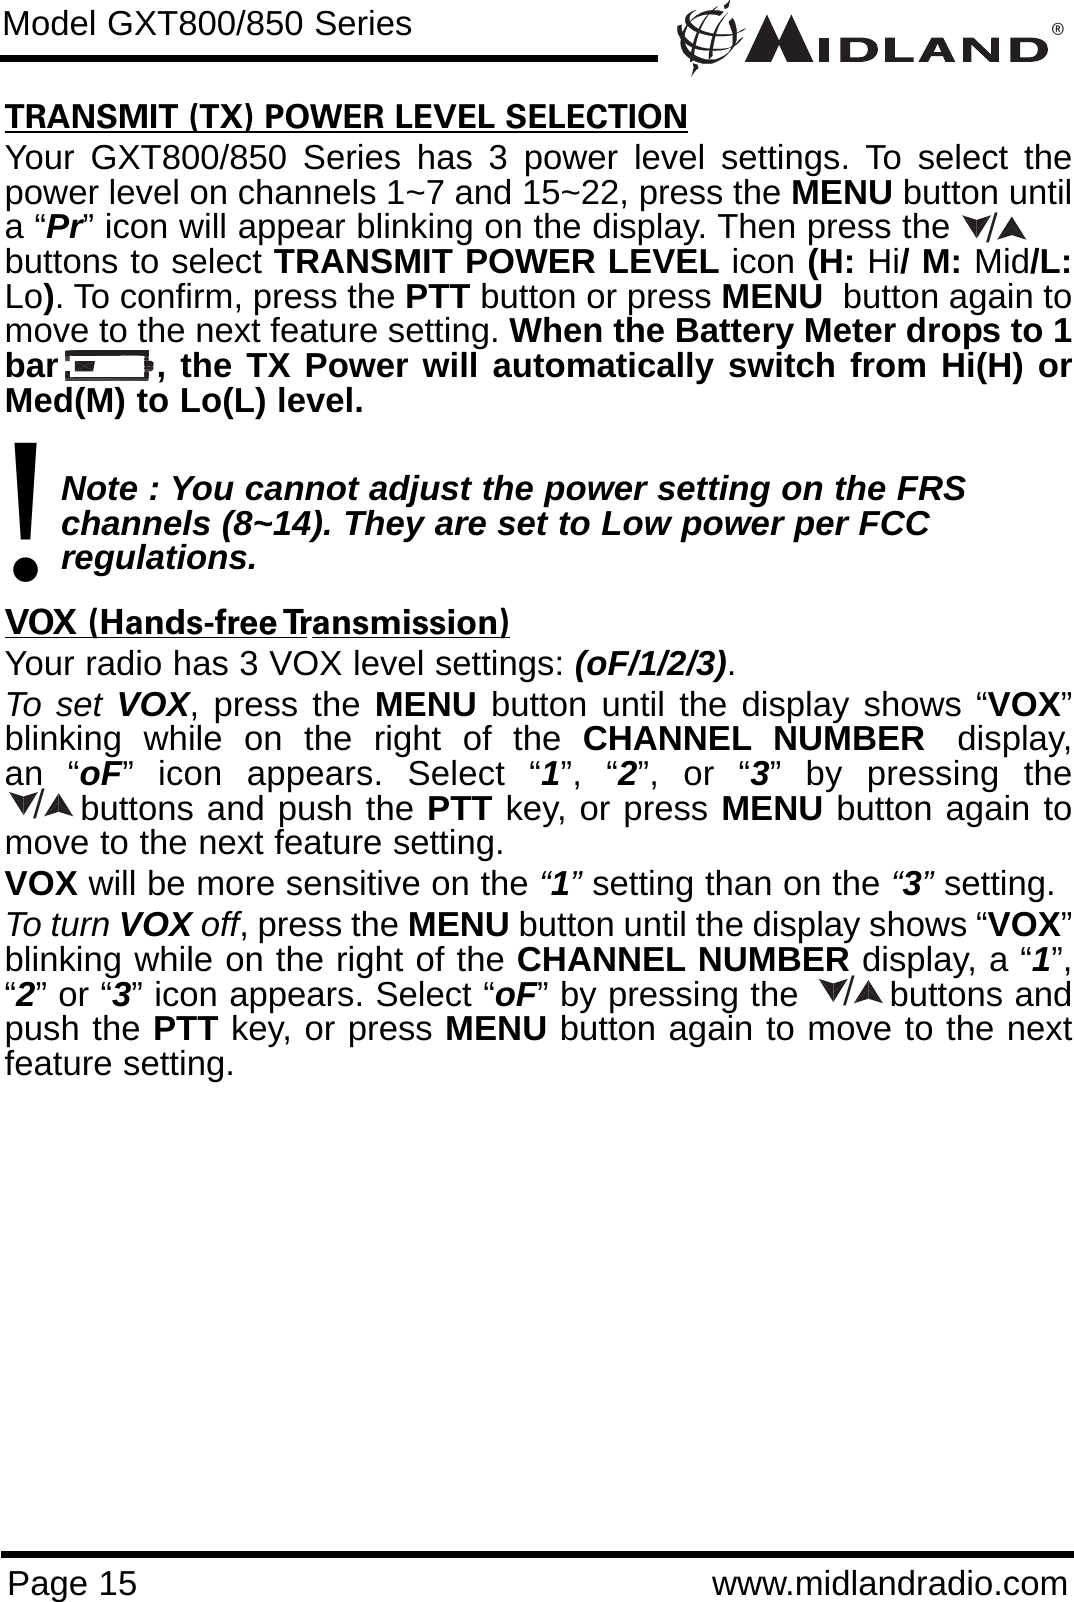 ®Page 15 www.midlandradio.comTRANSMIT (TX) POWER LEVEL SELECTIONYour GXT800/850 Series has 3 power level settings. To select thepower level on channels 1~7 and 15~22, press the MENU button untila “Pr” icon will appear blinking on the display. Then press the           buttons to select TRANSMIT POWER LEVEL icon (H: Hi/ M: Mid/L:Lo). To confirm, press the PTT button or press MENU button again tomove to the next feature setting. When the Battery Meter drops to 1bar       , the TX Power will automatically switch from Hi(H) orMed(M) to Lo(L) level.Note : You cannot adjust the power setting on the FRS   channels (8~14). They are set to Low power per FCC          regulations.VOX (Hands-free Transmission)Your radio has 3 VOX level settings: (oF/1/2/3).To set VOX, press the MENU button until the display shows “VOX”blinking  while  on  the  right  of  the  CHANNEL NUMBER display,an “oF” icon appears. Select “1”, “2”, or “3” by pressing thebuttons and push the PTT key, or press MENU button again tomove to the next feature setting.  VOX will be more sensitive on the “1”setting than on the “3”setting.To turn VOX off, press the MENU button until the display shows “VOX”blinking while on the right of the CHANNEL NUMBER display, a “1”,“2” or “3” icon appears. Select “oF” by pressing the        buttons andpush the PTT key, or press MENU button again to move to the nextfeature setting.Model GXT800/850 Series!///